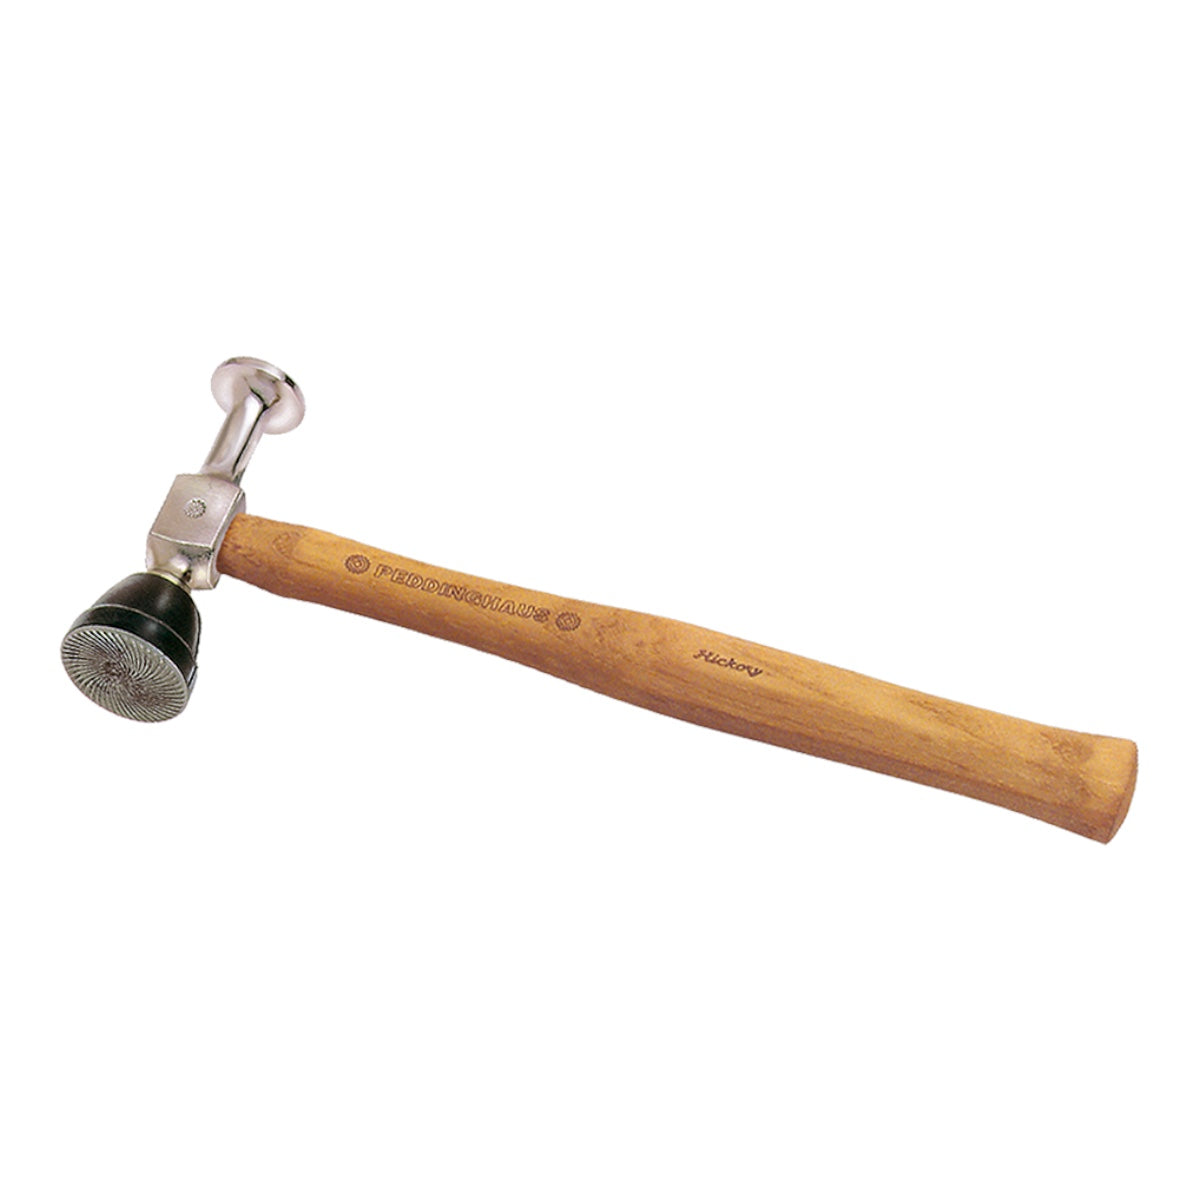 Torque dent removal hammer 300 g with hickory handle